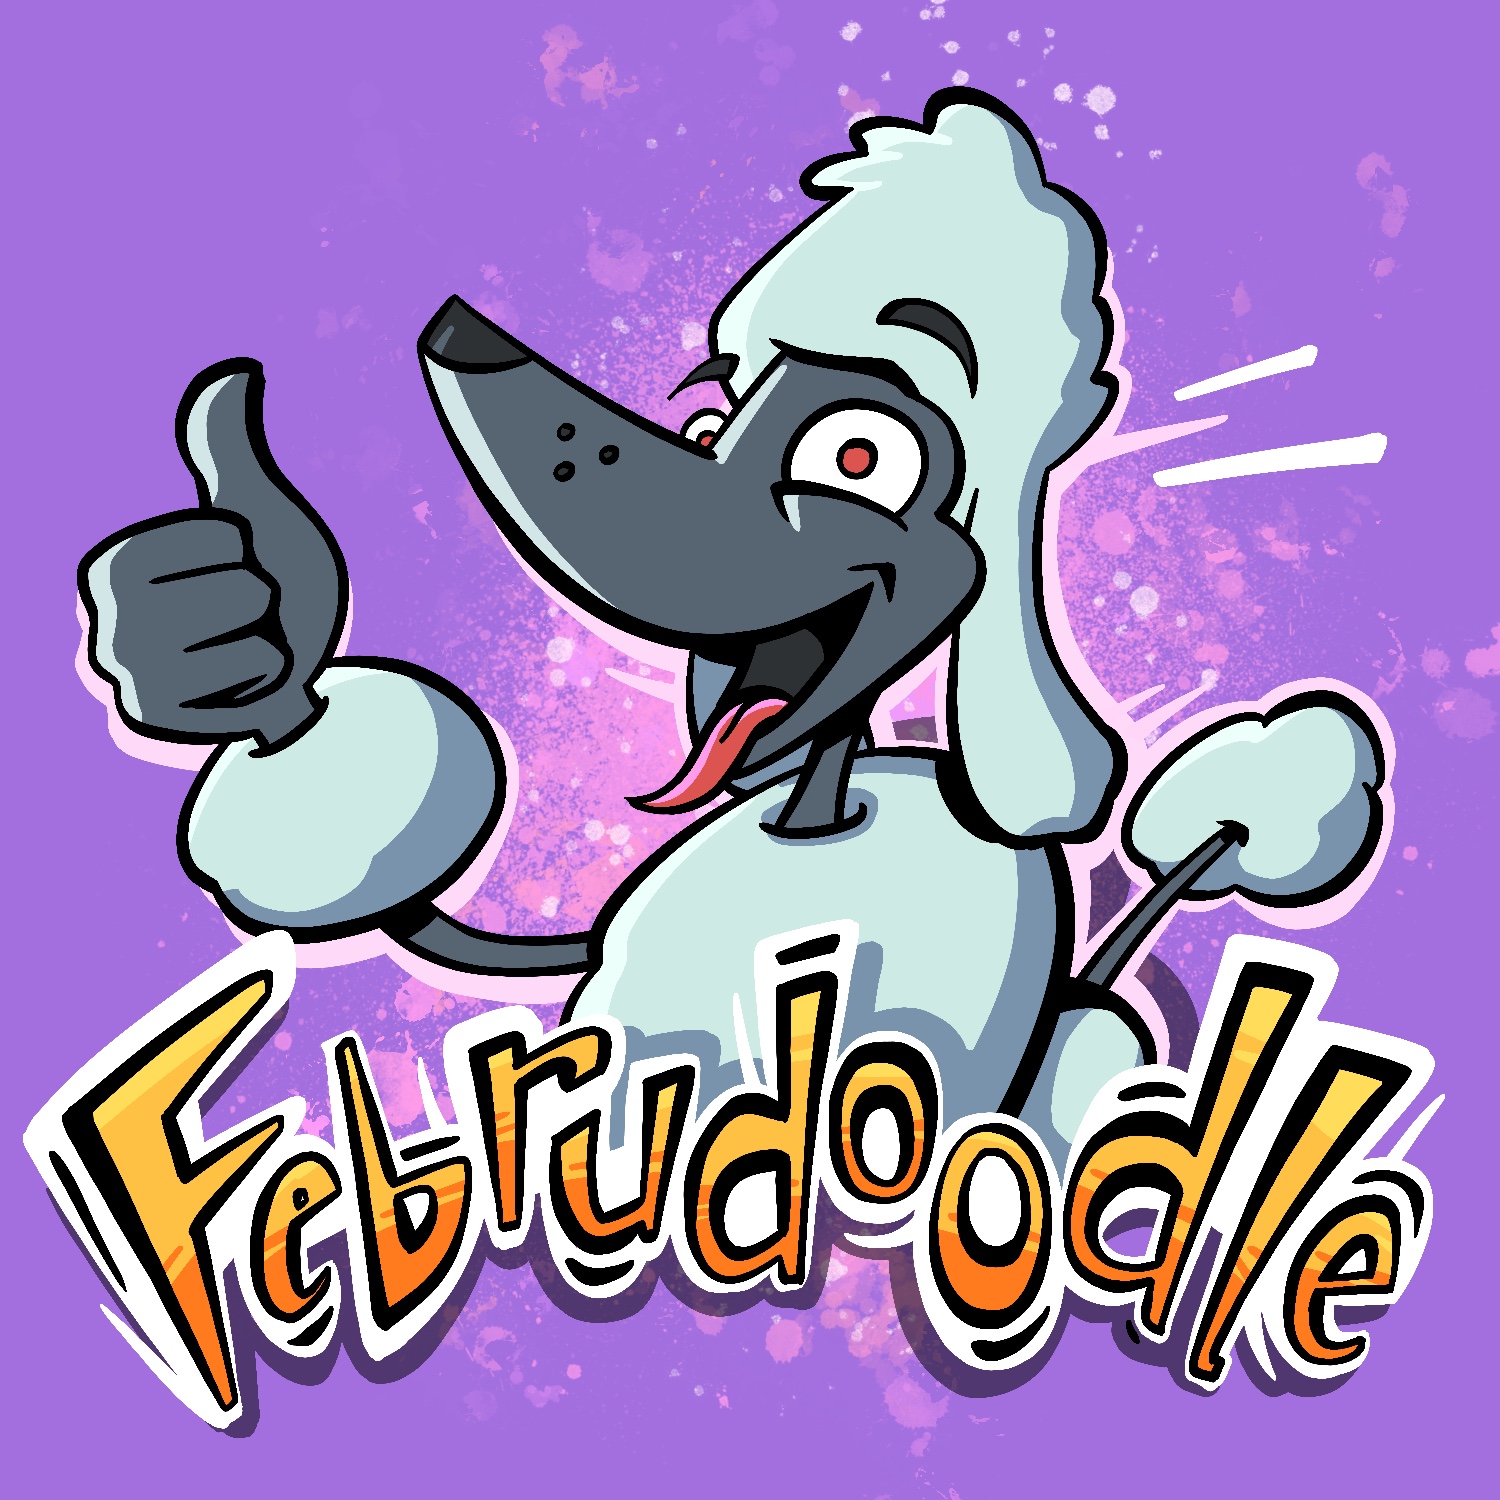 An illustration of a smiling cartoon poodle enthusiastically giving a thumbs up. The word "Februdoodle" is drawn in a lively font below. The letters are yellow and orange, and the poodle is a blue-ish gray with puffy, very pale blue fur.